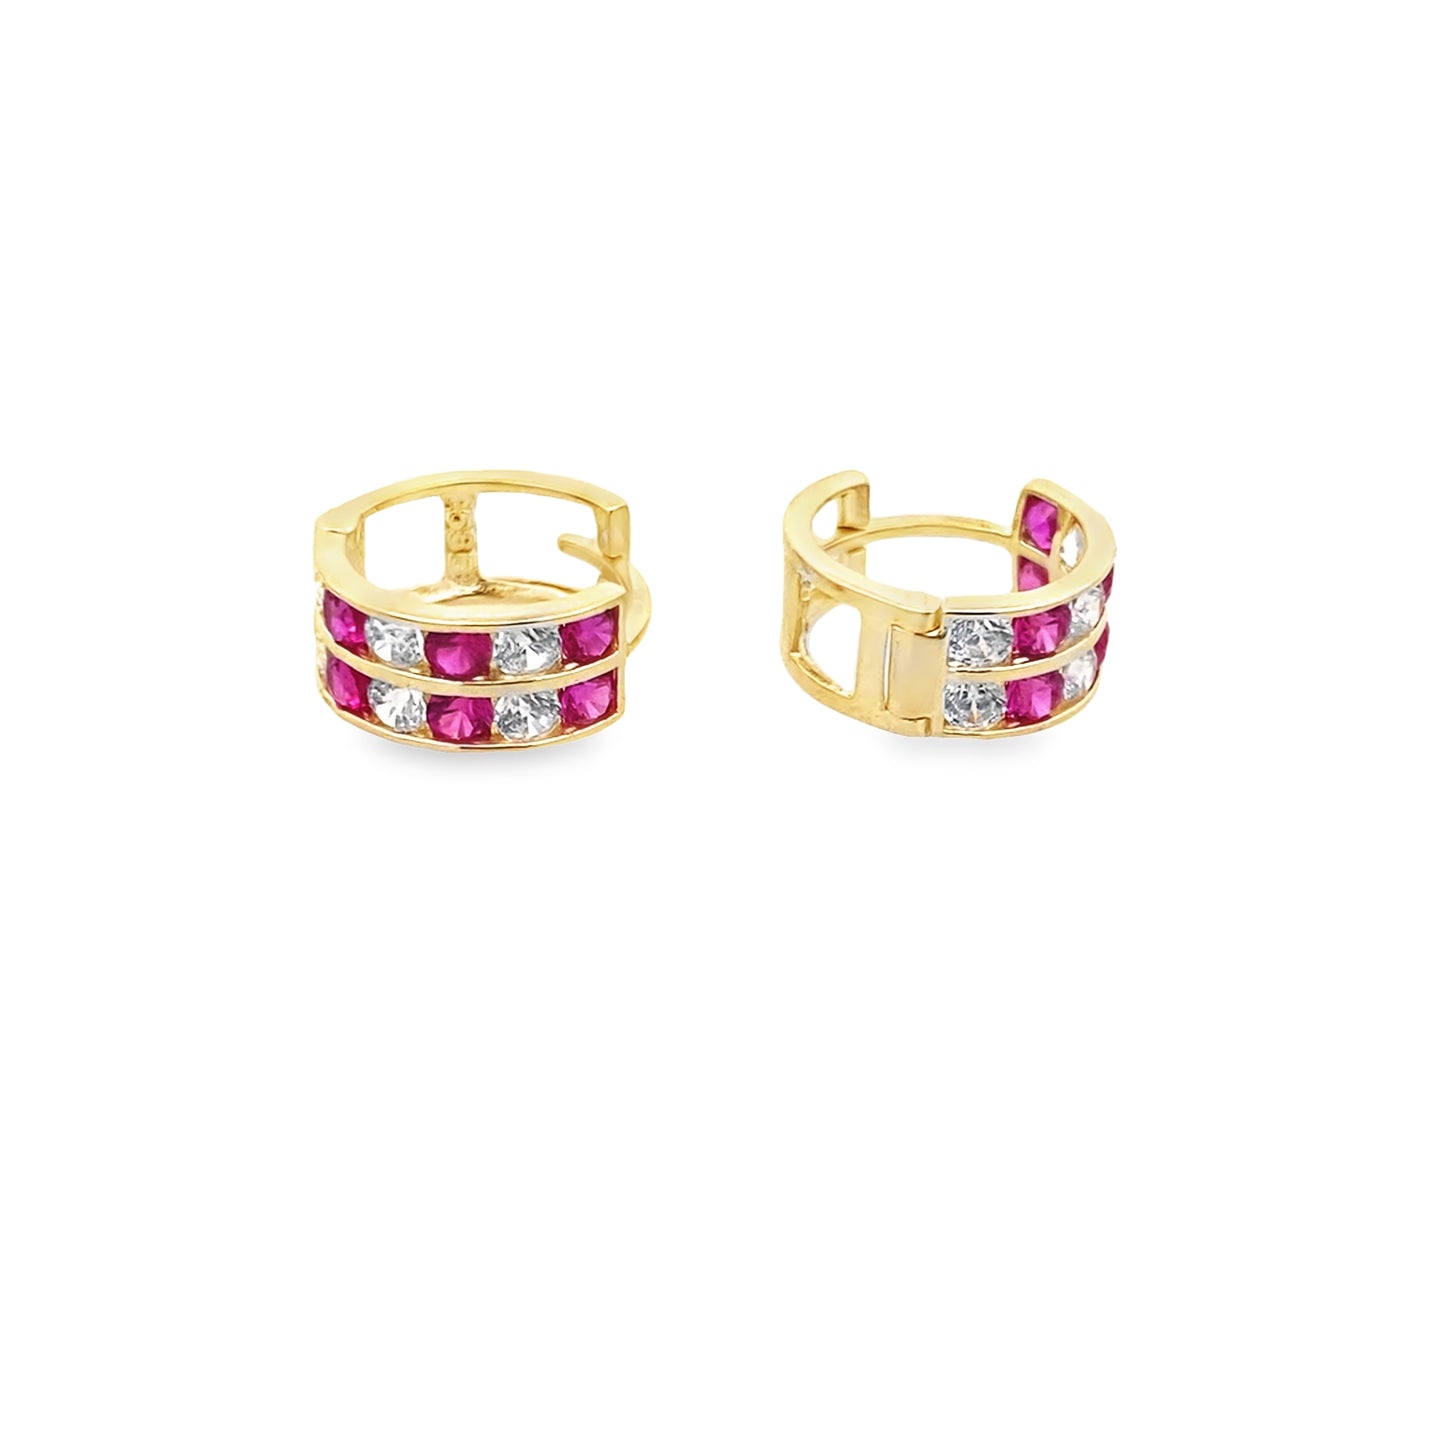 14K Yellow Gold Small Cz & Red Stone Hoop Earrings 1.3Dwt